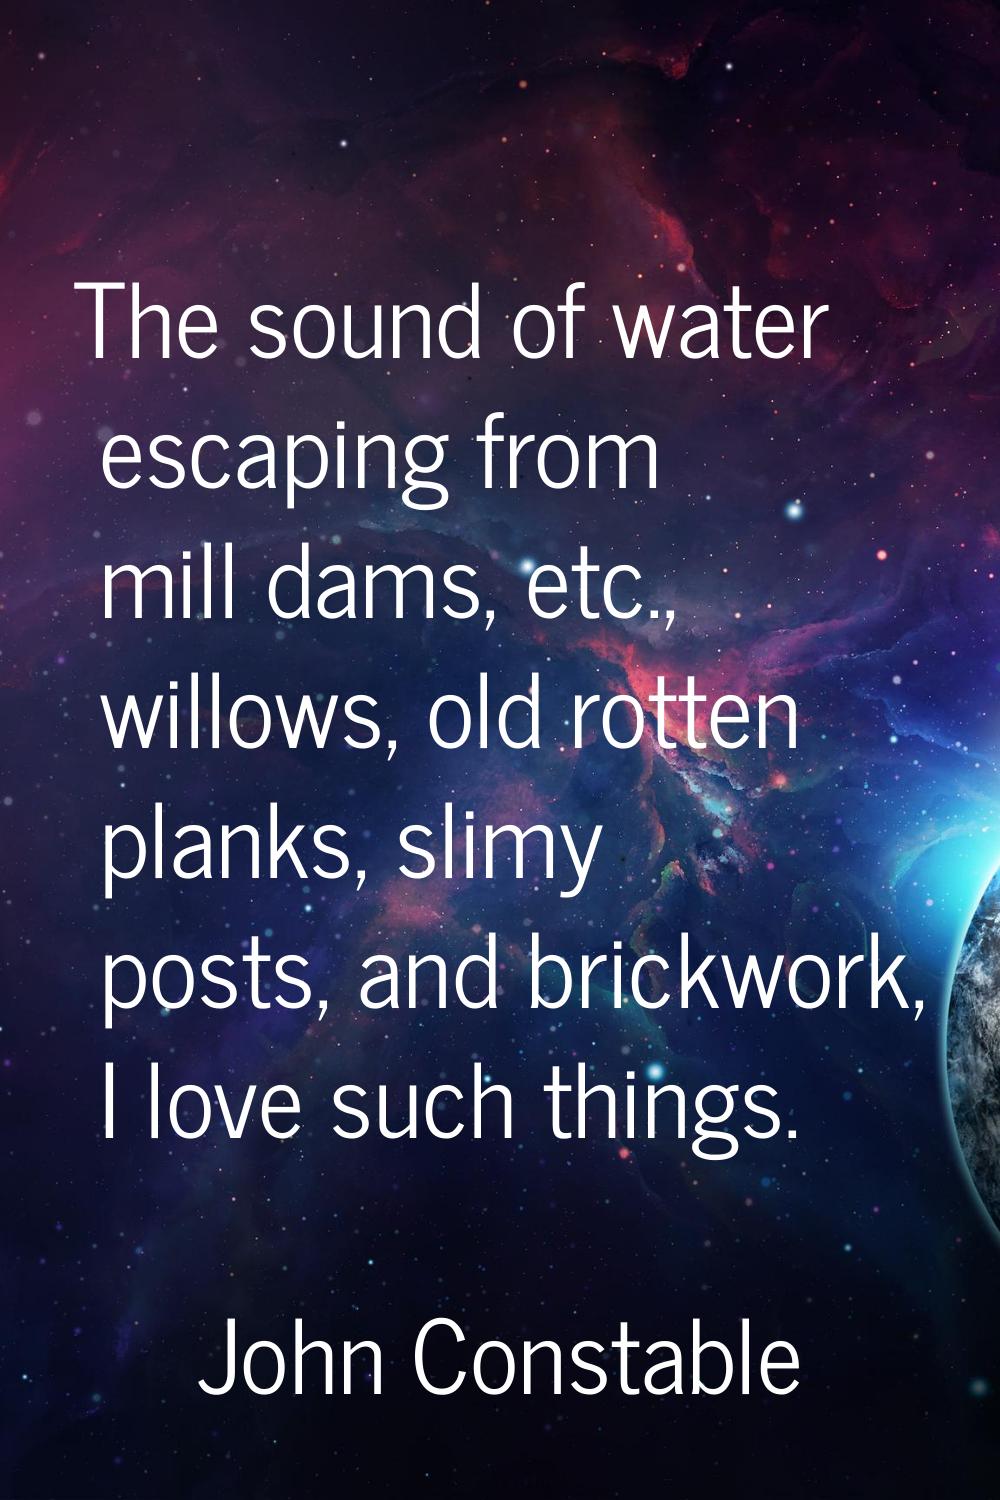 The sound of water escaping from mill dams, etc., willows, old rotten planks, slimy posts, and bric